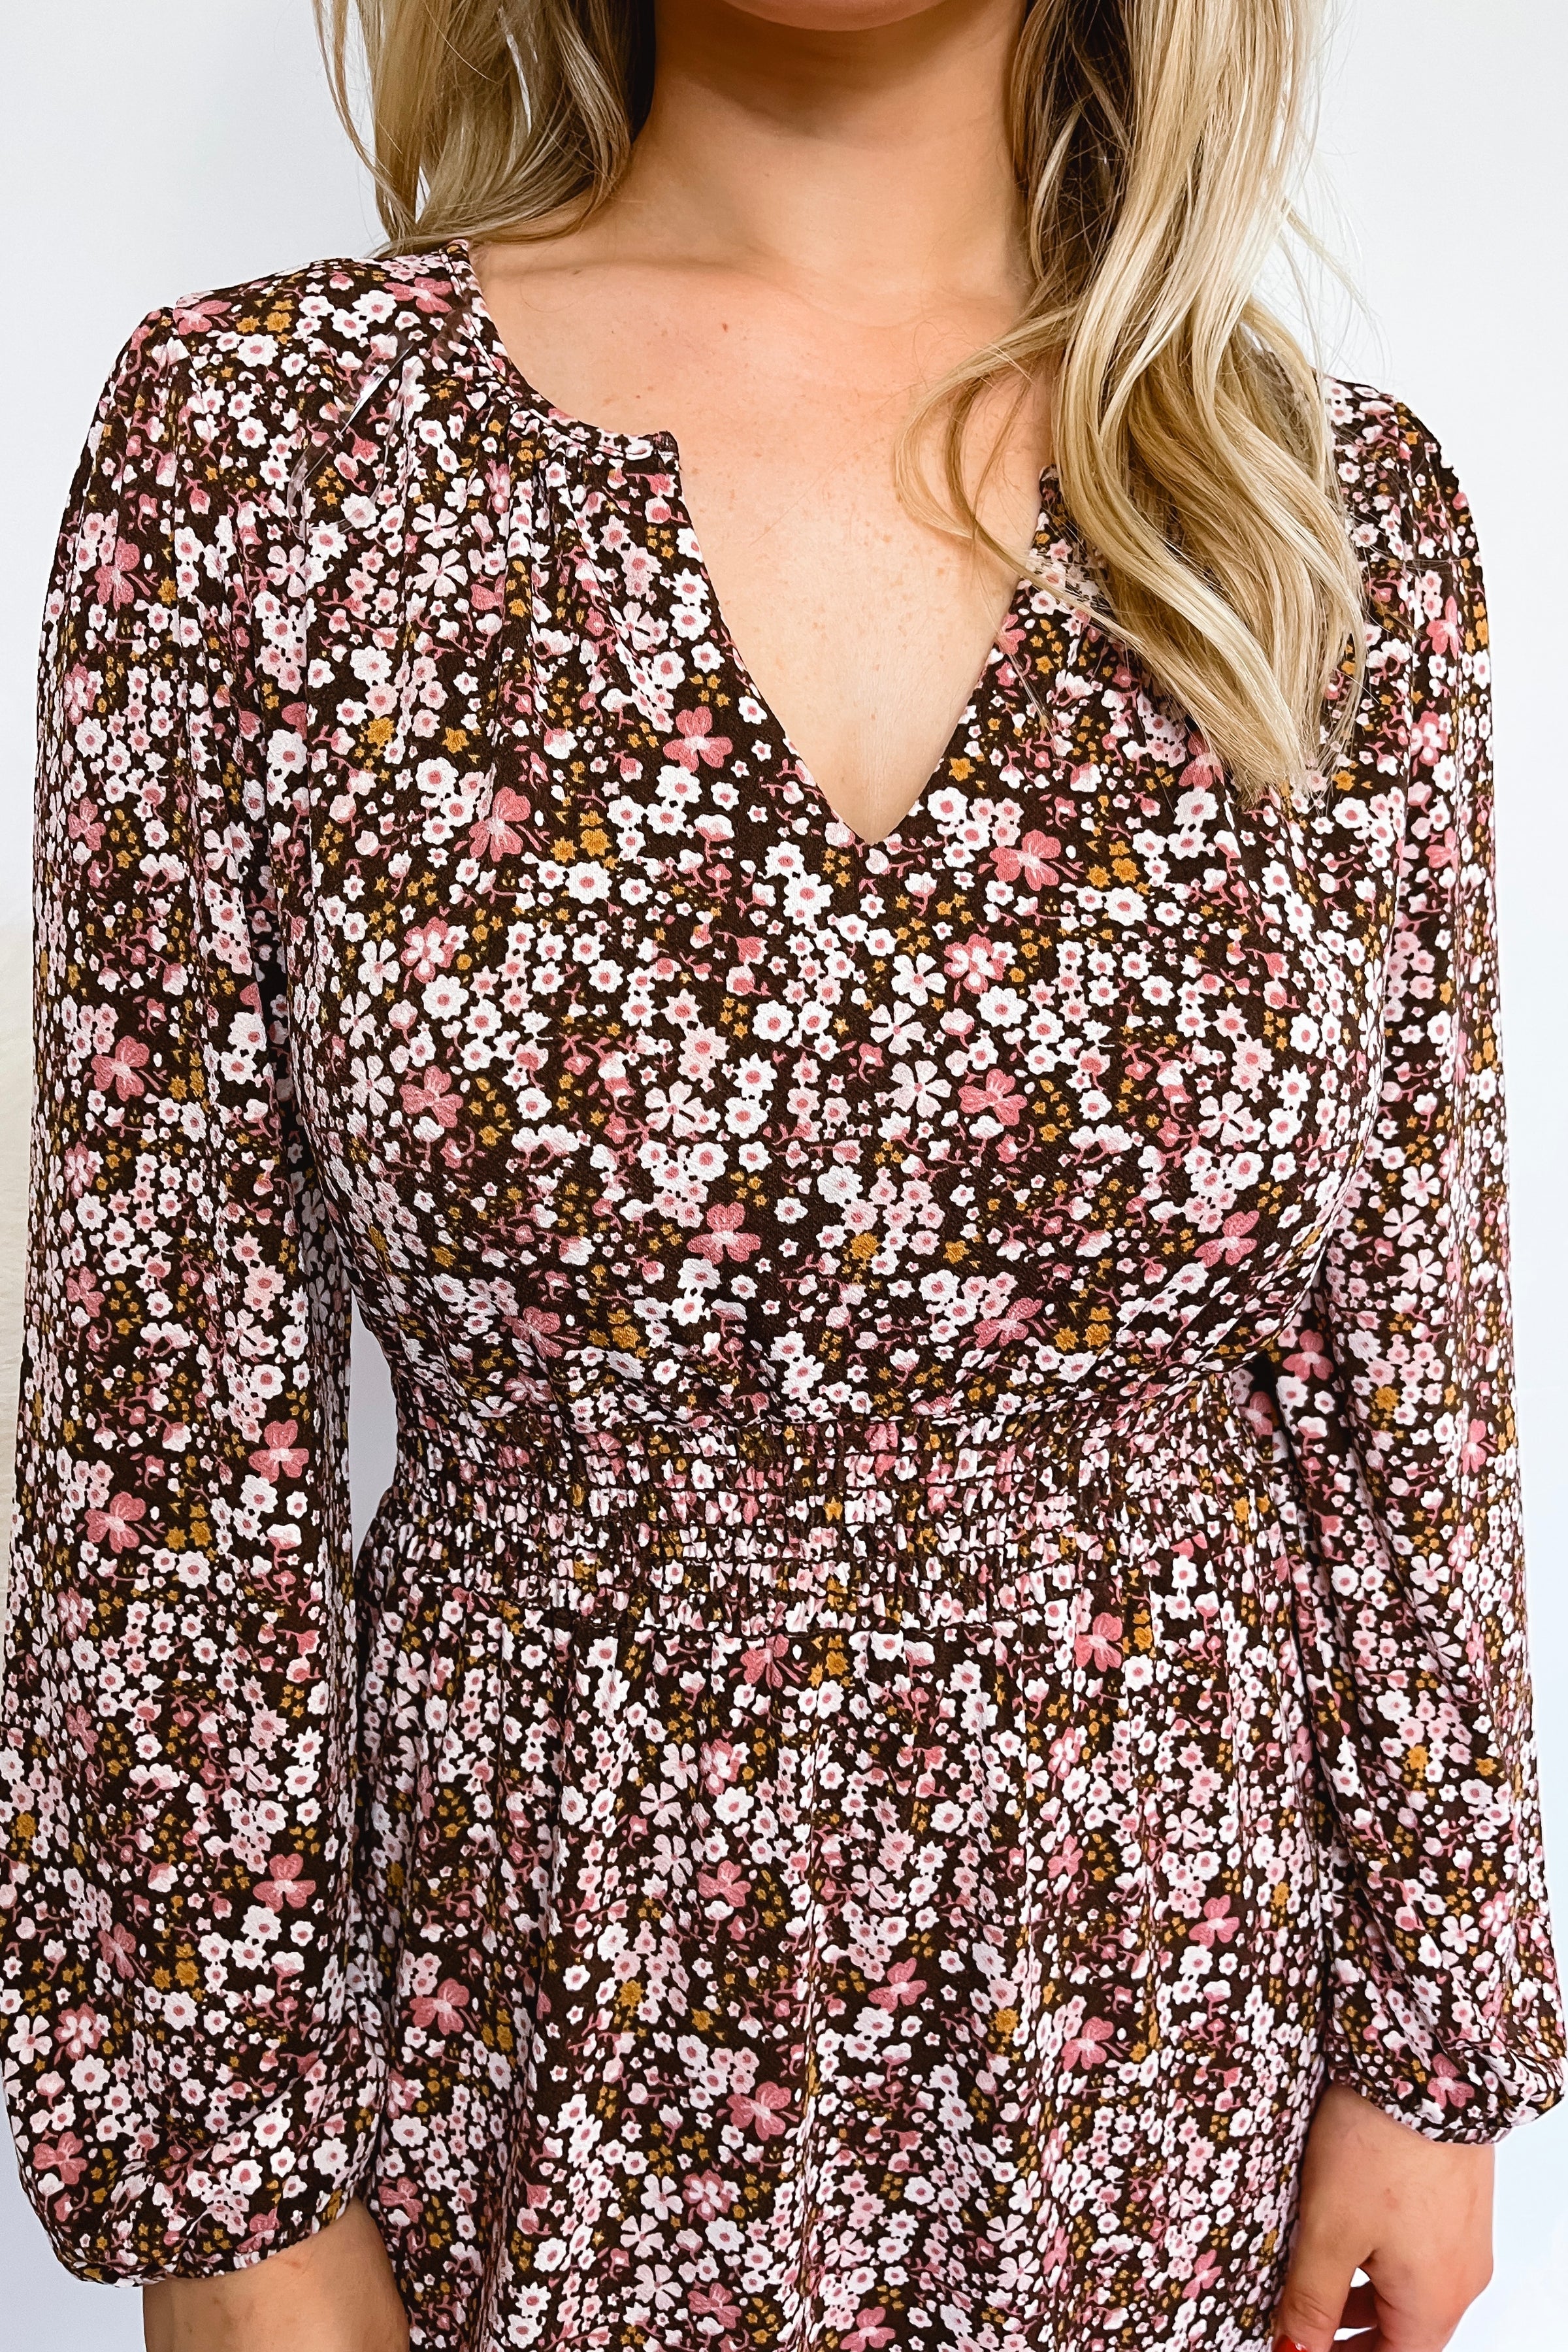 Carried Away Floral Mini Dress - Brown